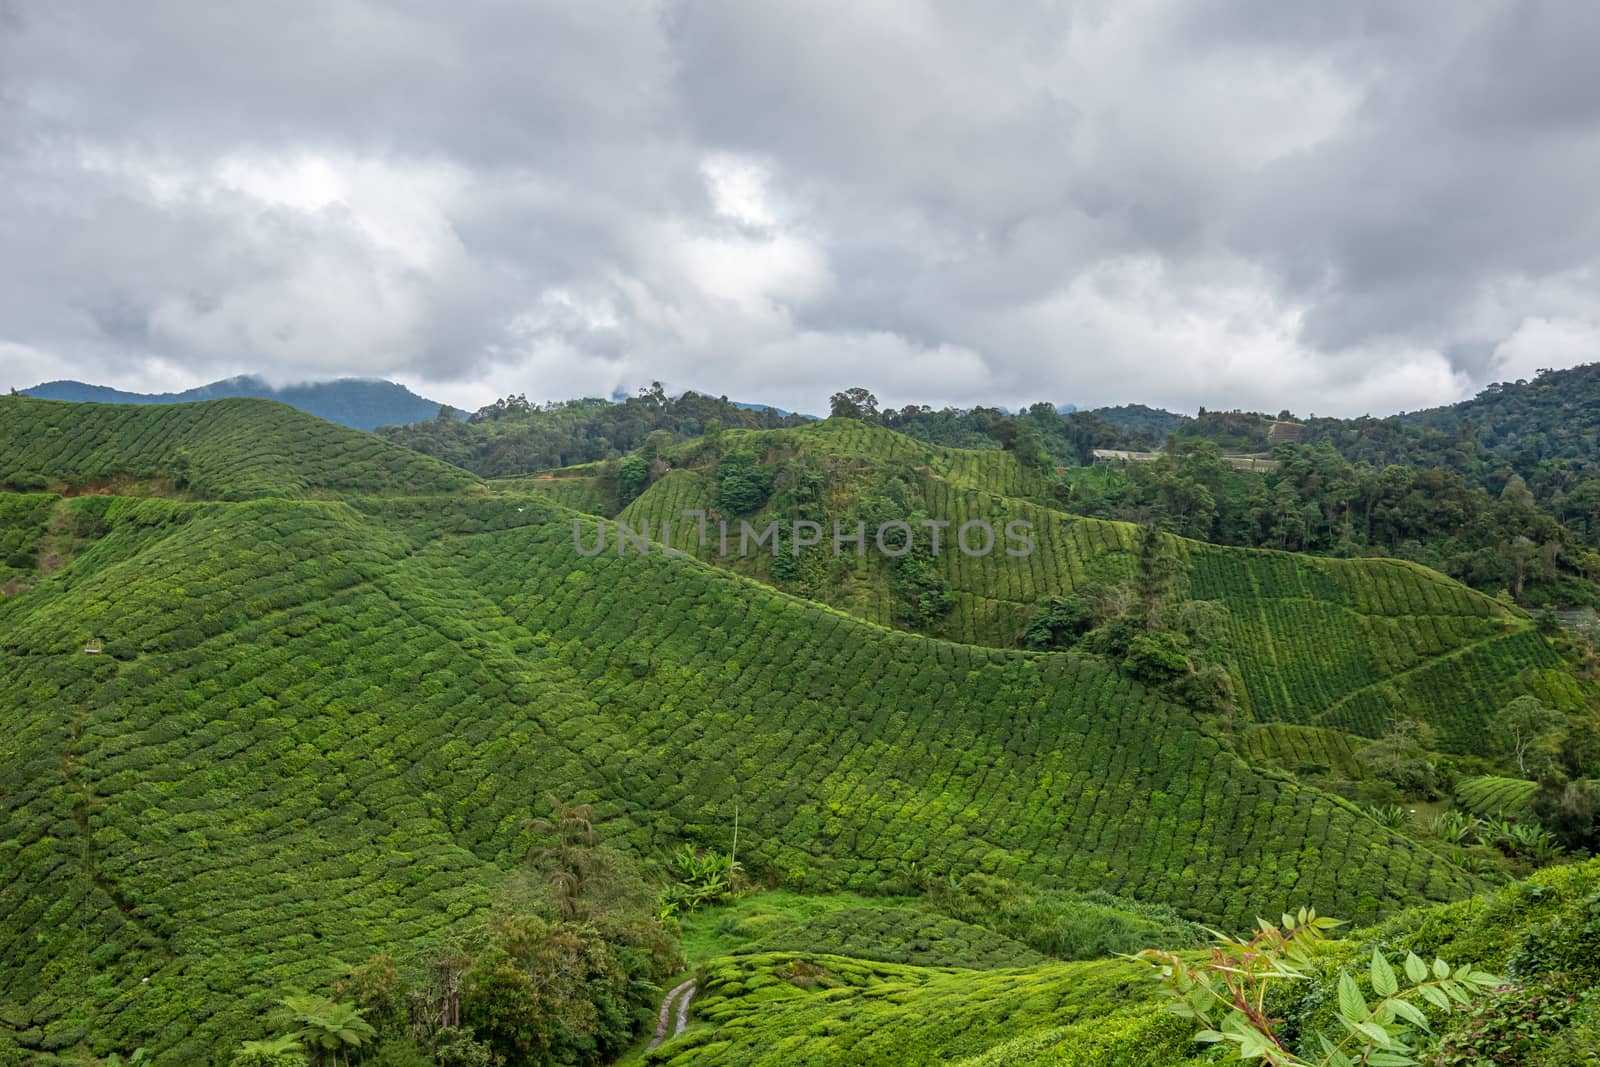 Tea plant rows covering steep mountain slopes in Cameron Highlands